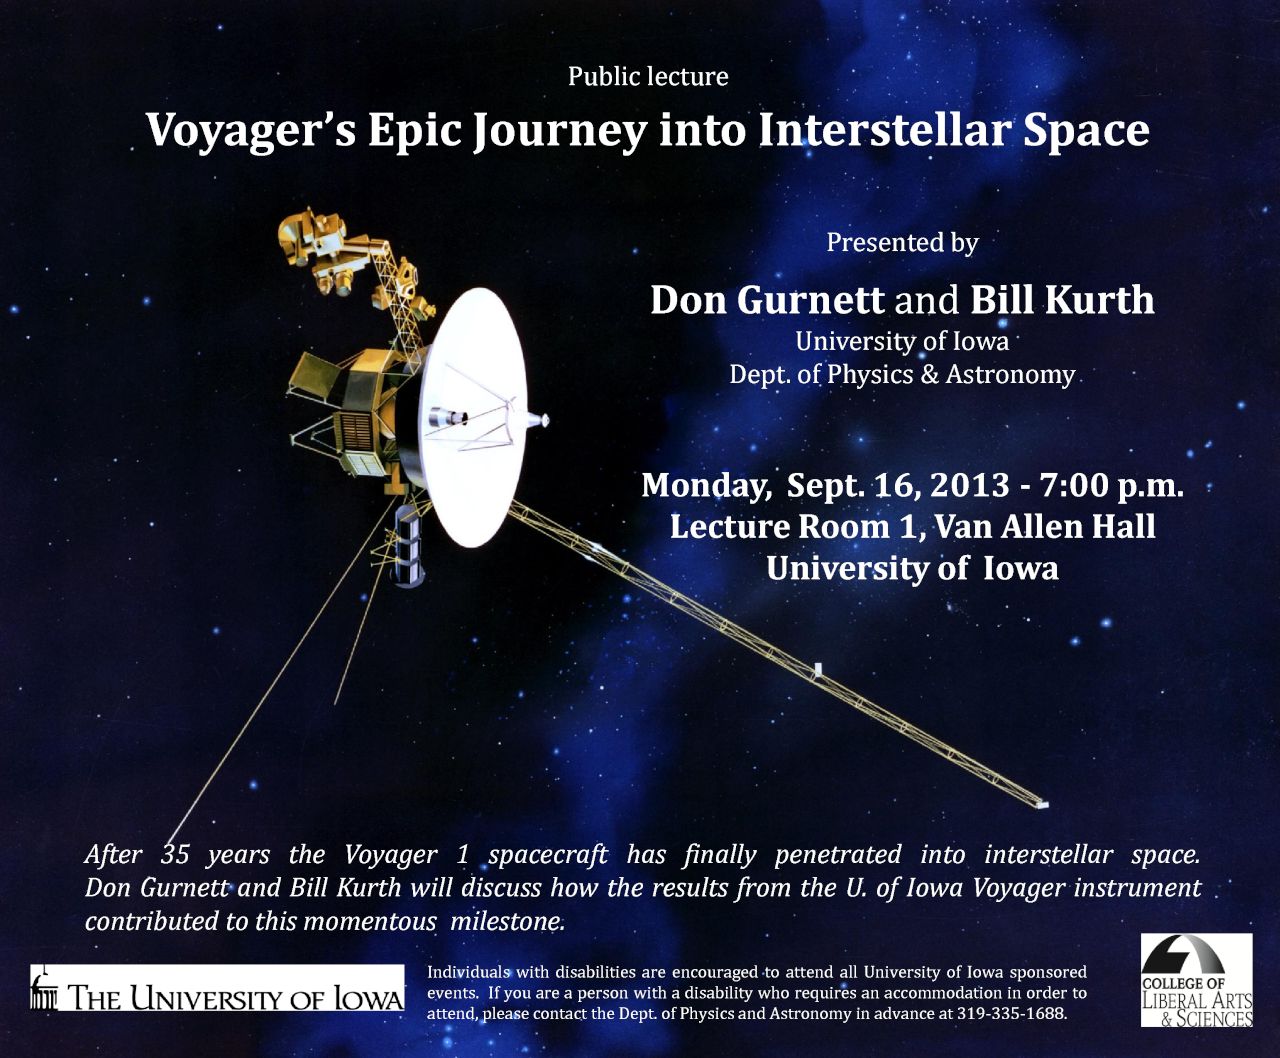 Public lecture:  Voyager's Epic Journey into Interstellar Space